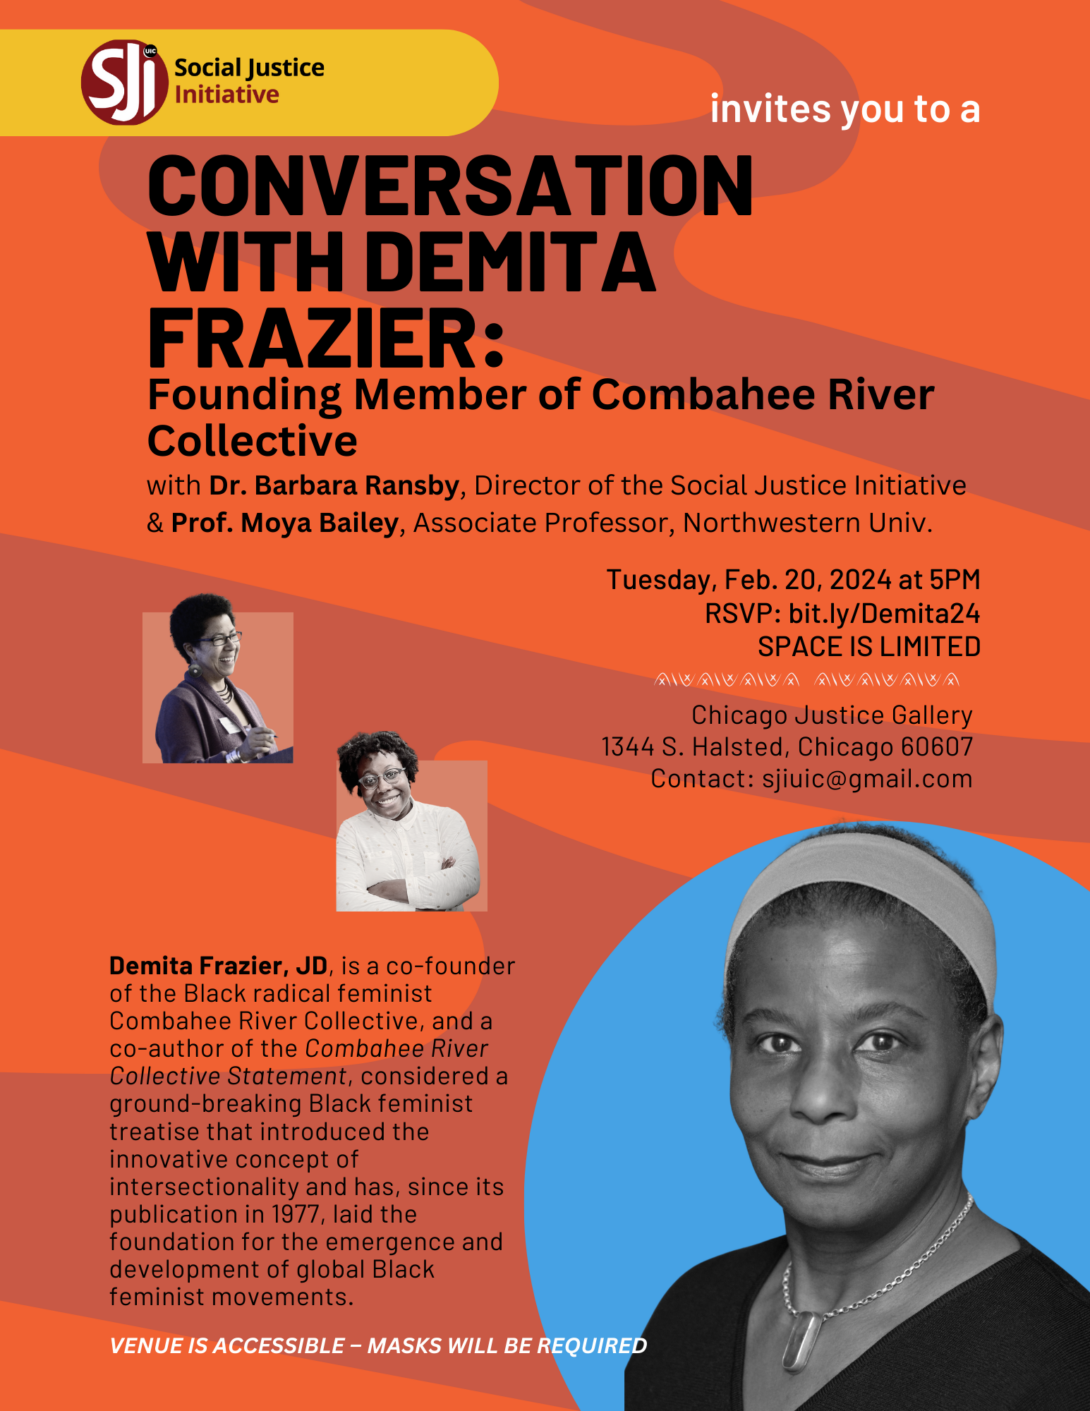 Orange flyer with blue river like graphic zigzags across. Text invites audience to Demita Frazier event. Photos of Ms Frazier and Dr Ransby appear on flyer.